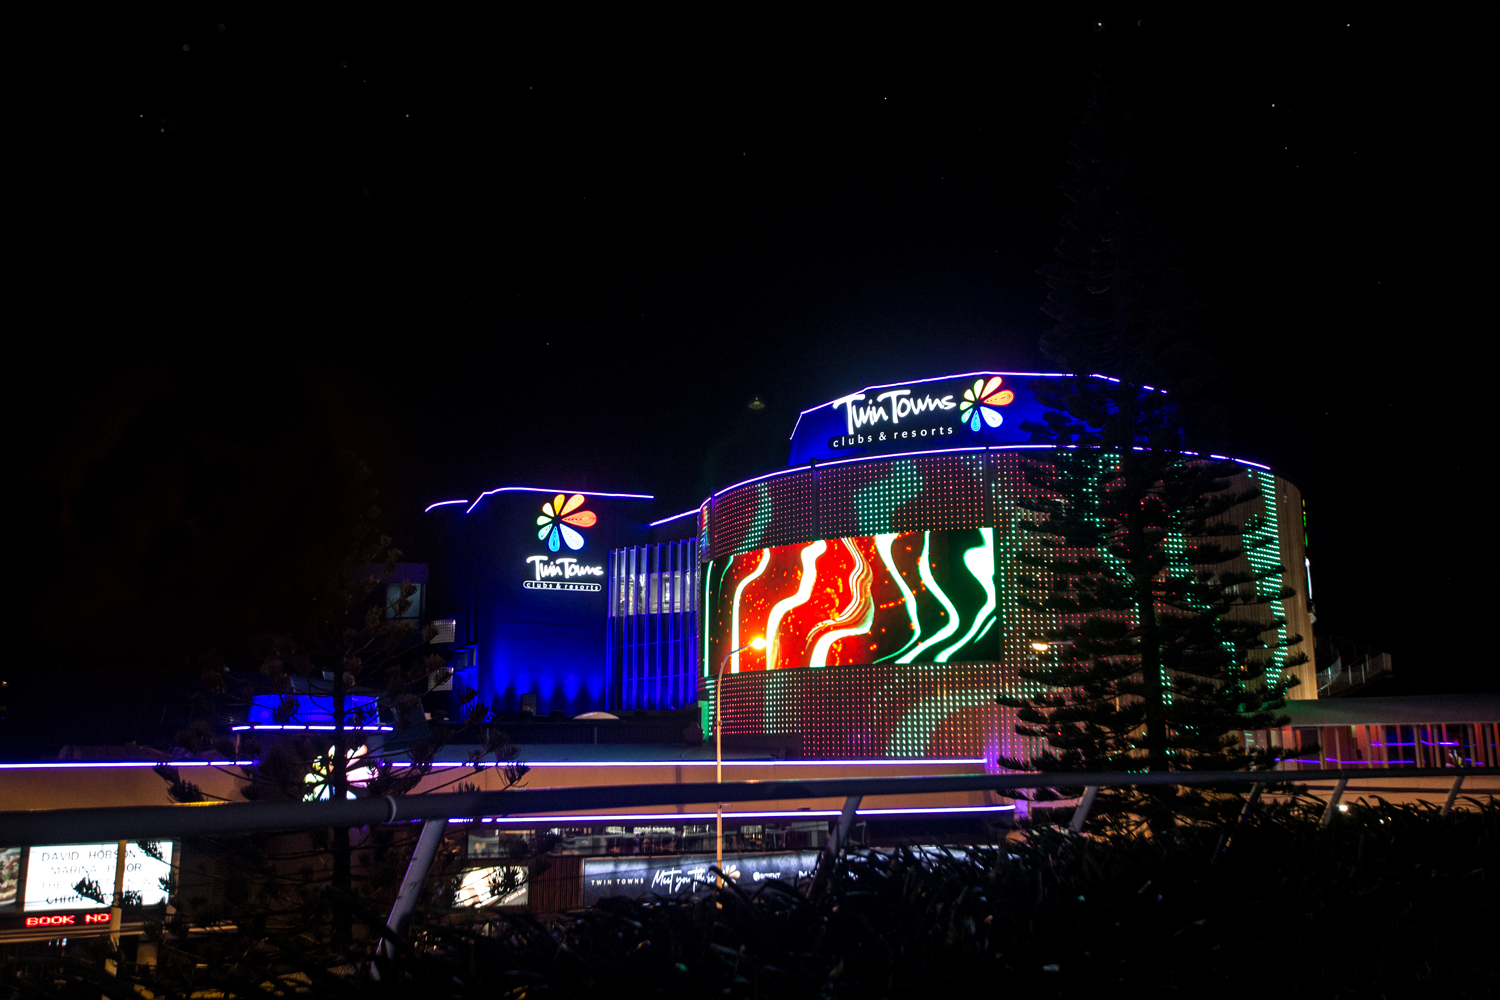 Twin Towns Curved LED Screen Building Facade Custom Digital Signage Solutions